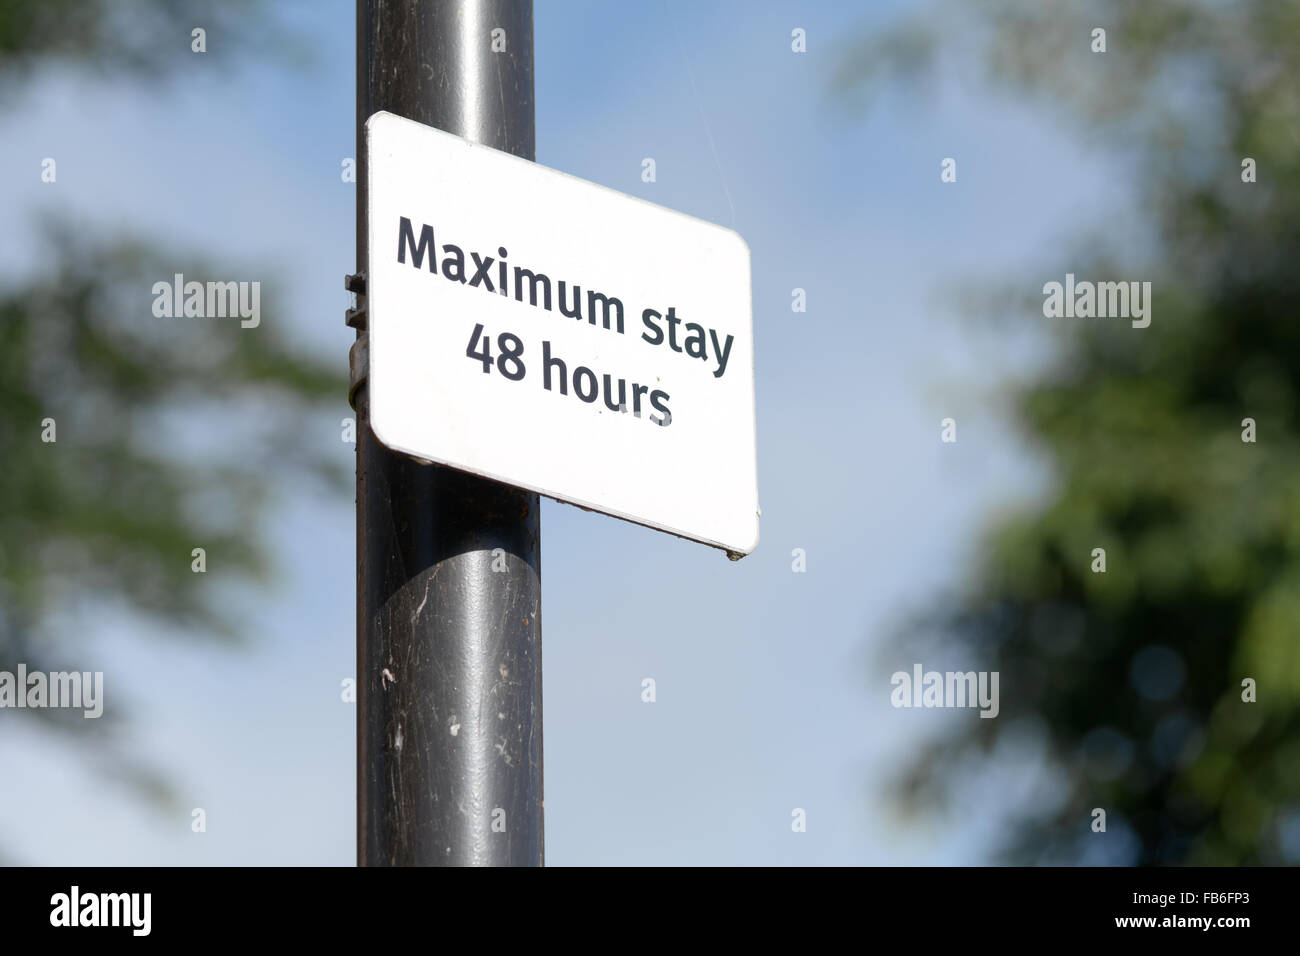 Maximum Stay - 48 hours sign Stock Photo